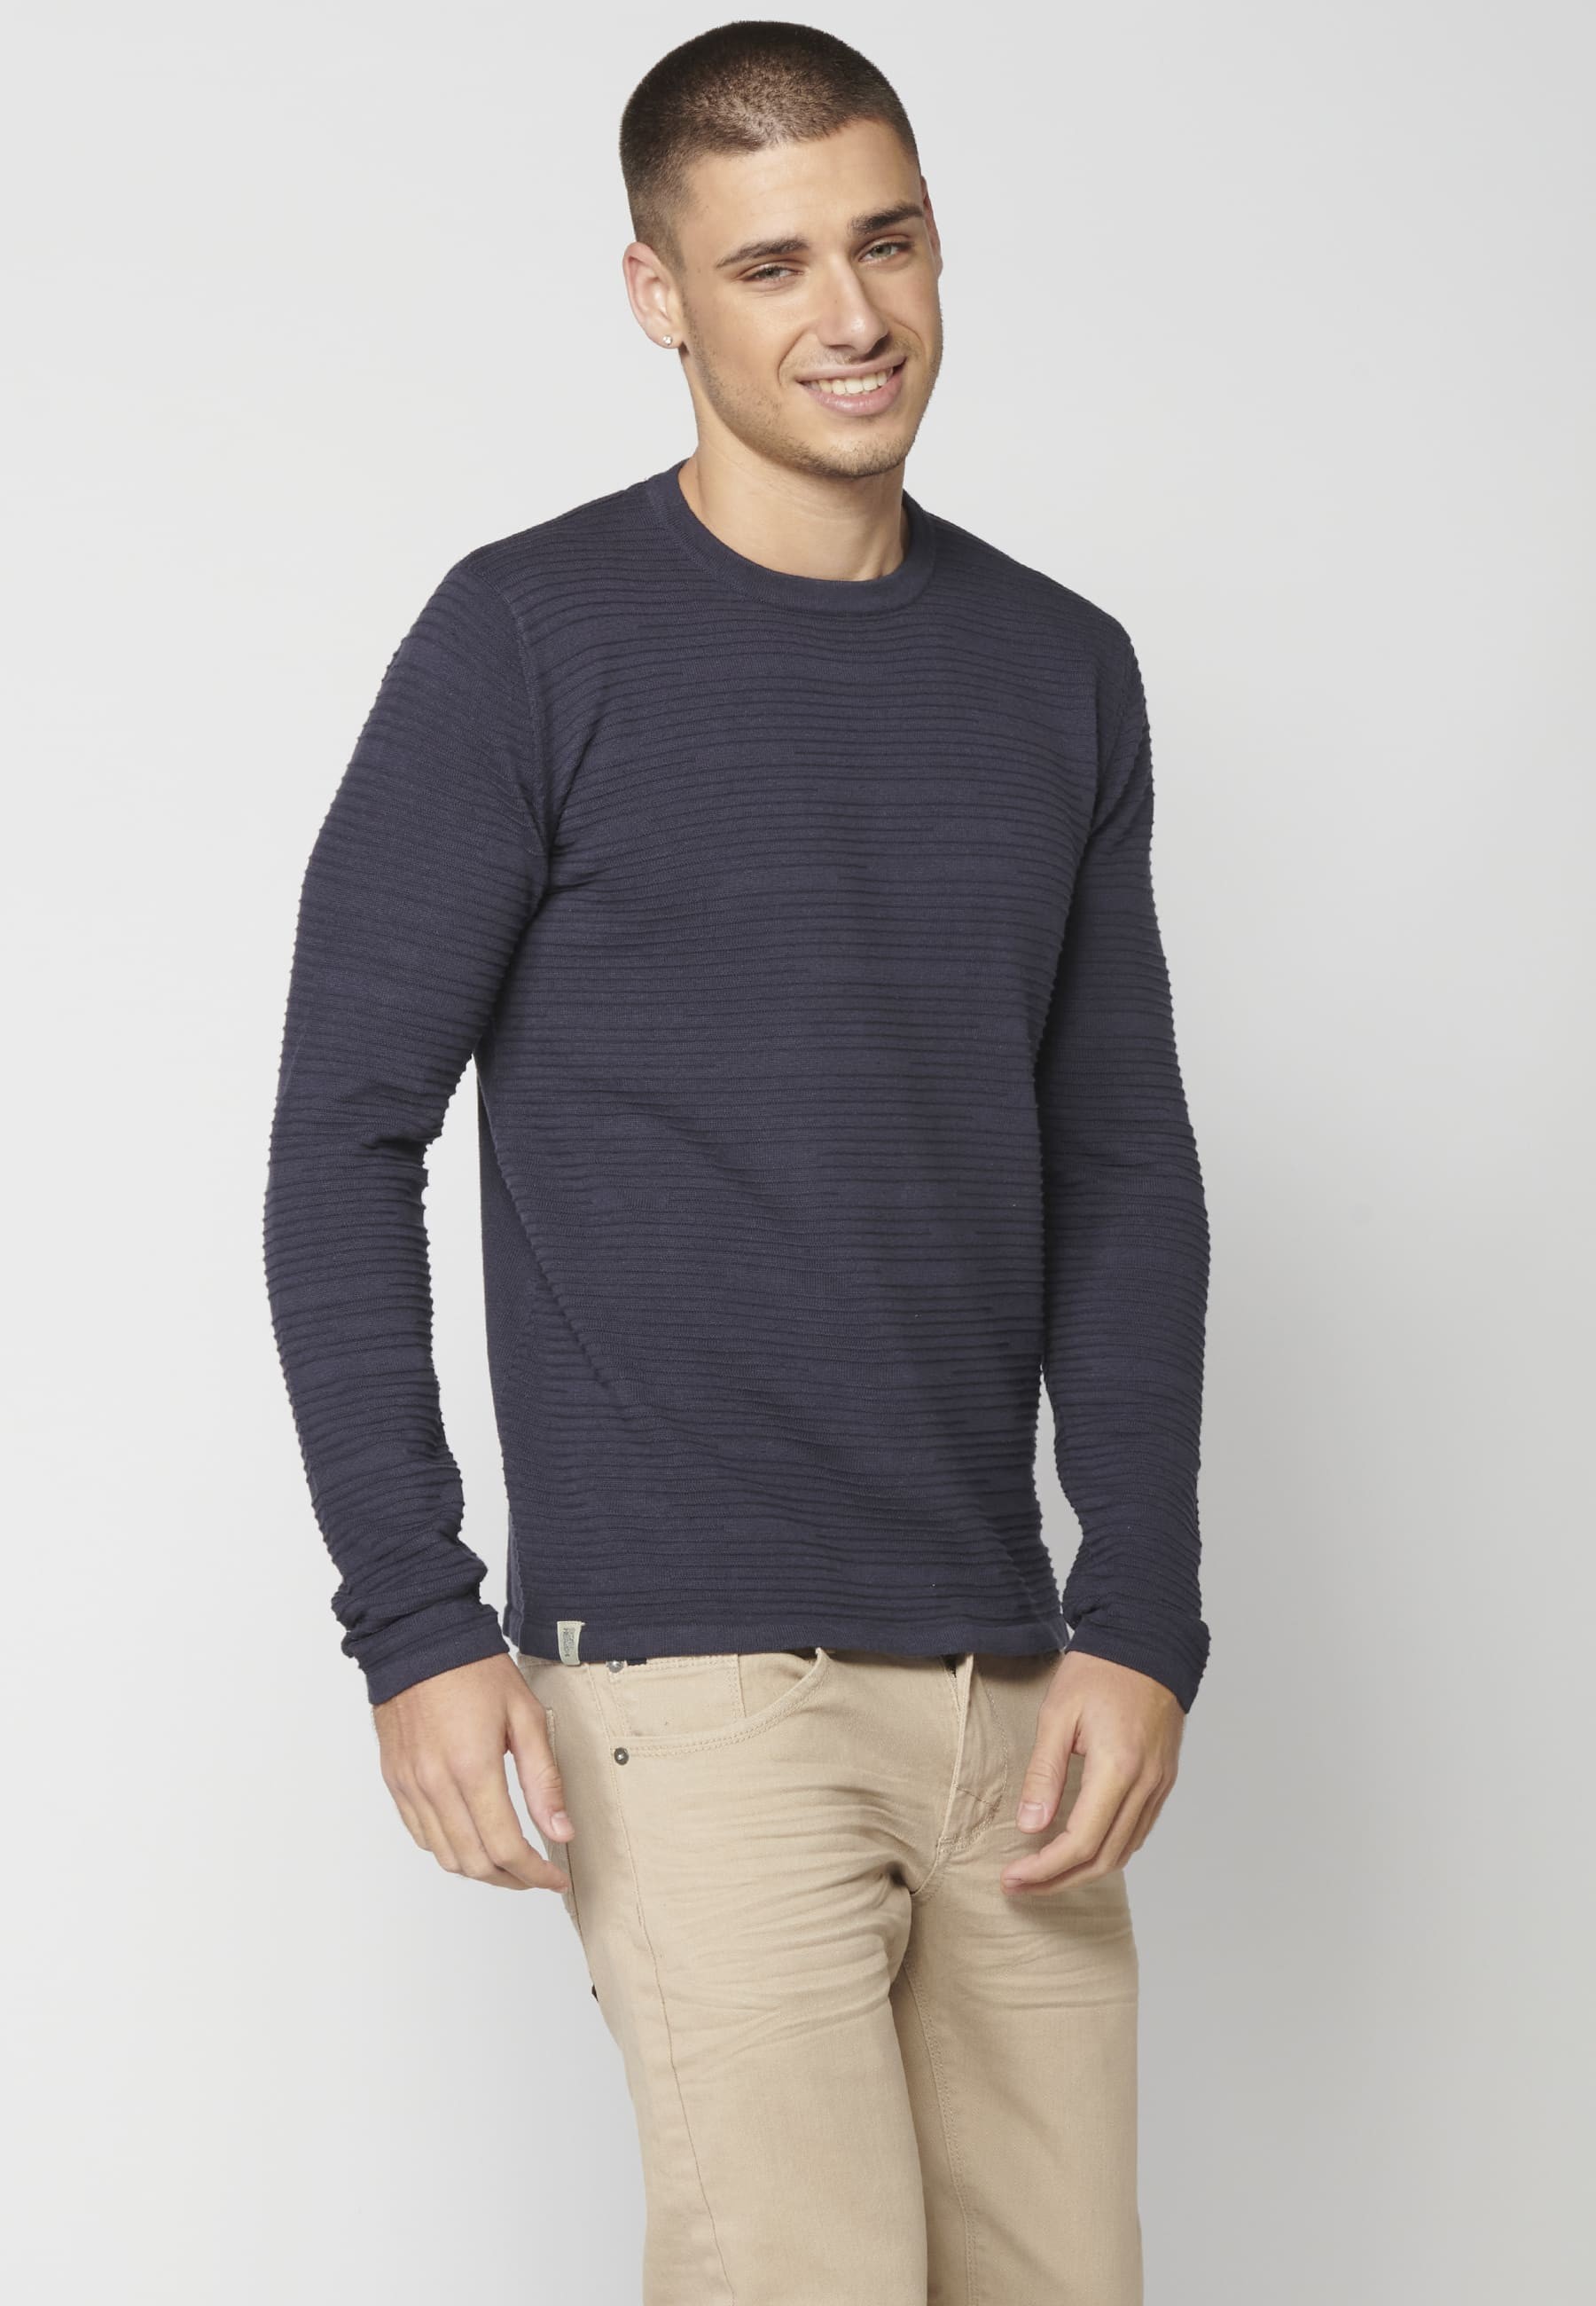 Navy textured knit sweater for Men